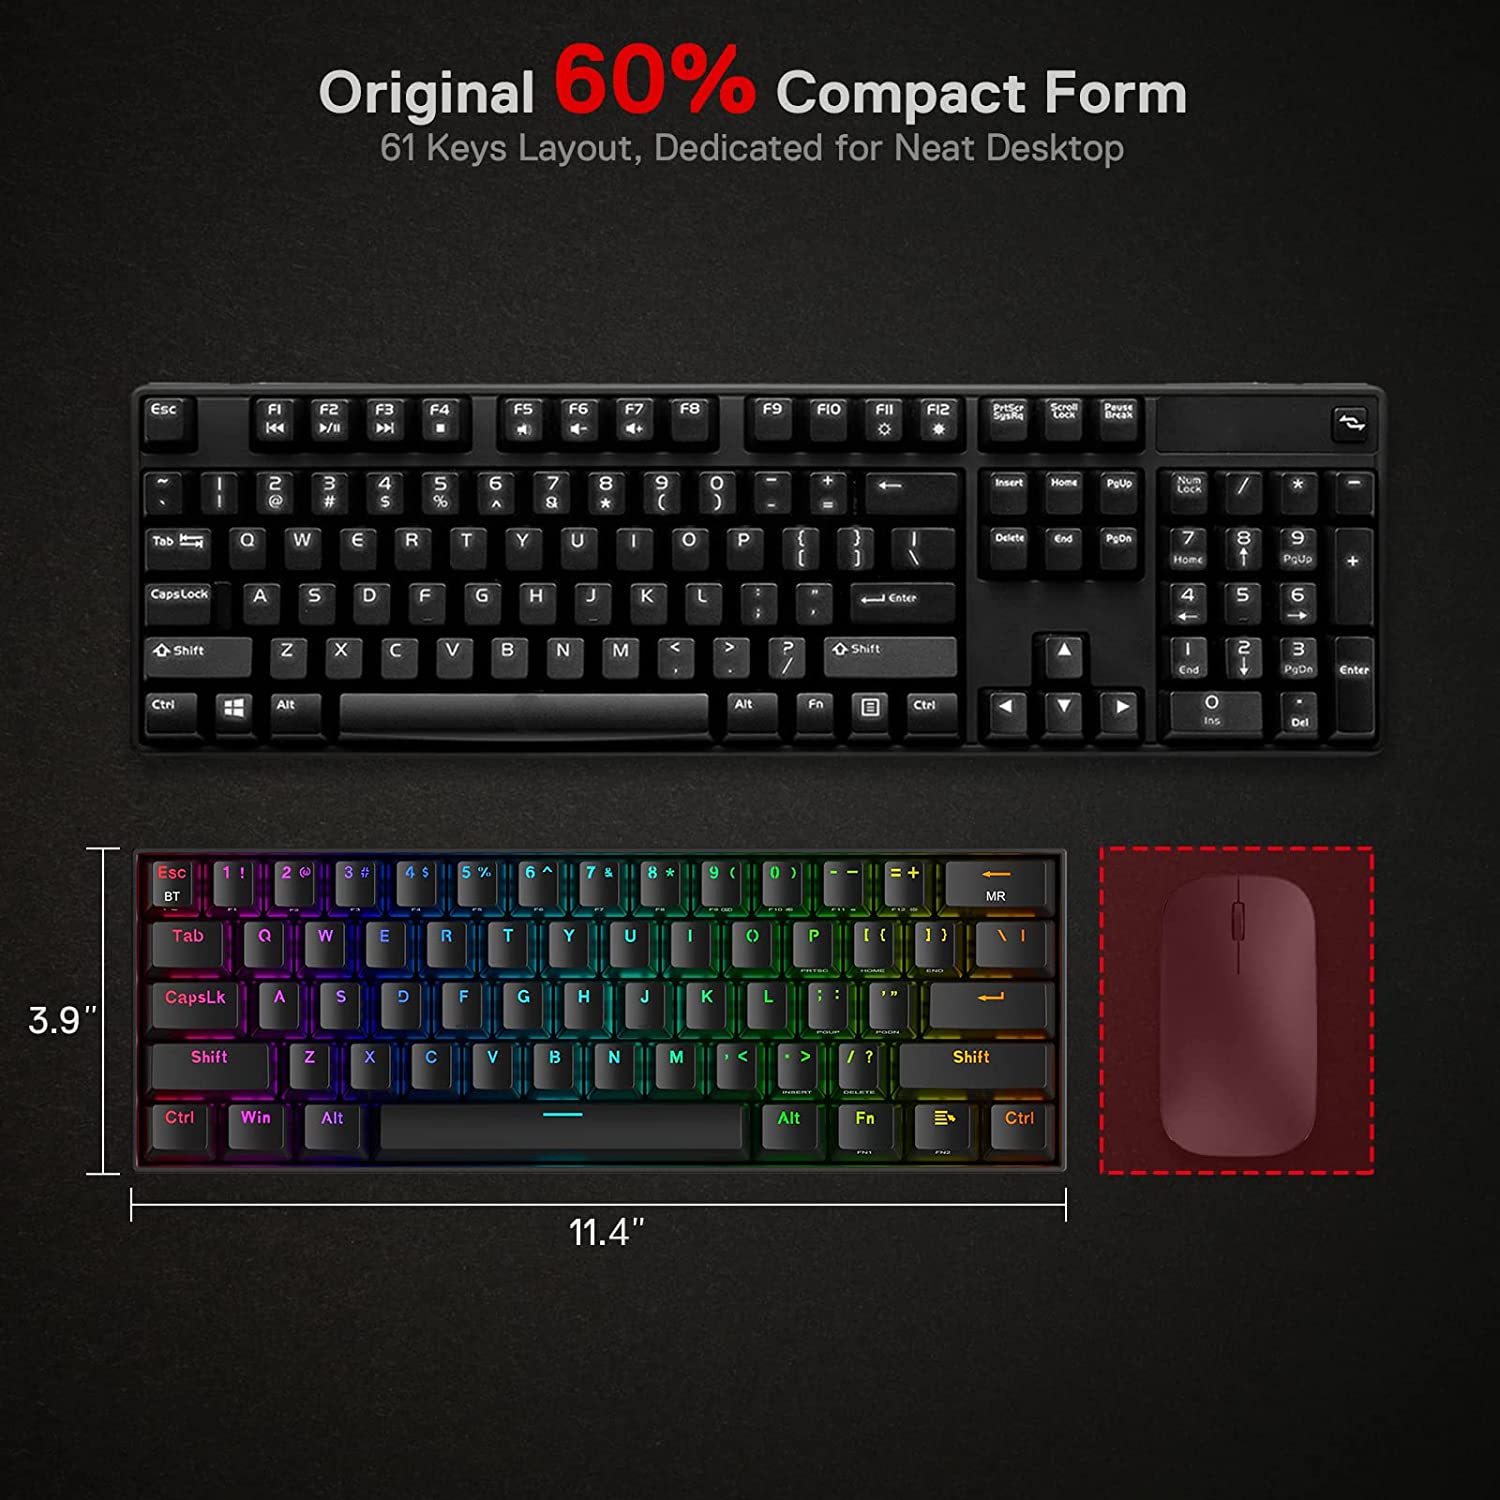 Redragon Draconic Pro K530 Pro - 60% Bluetooth+2.4Ghz+Wired Mechanical Keyboard (Brown Switch)